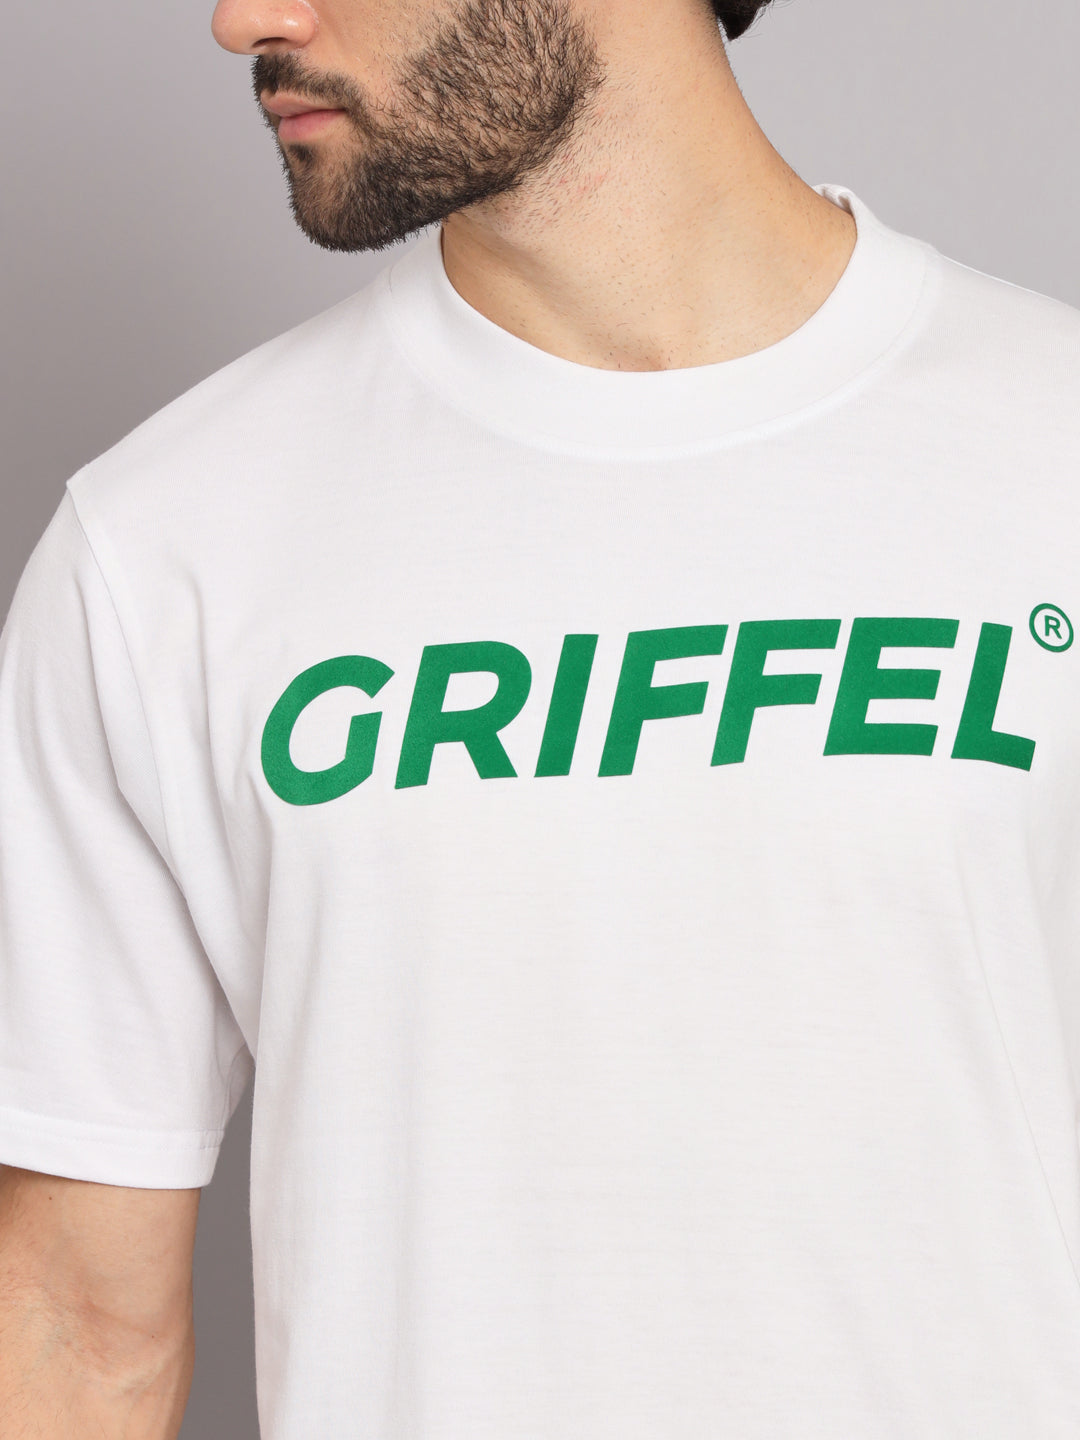 GRIFFEL Men Printed White Loose fit T-shirt - griffel